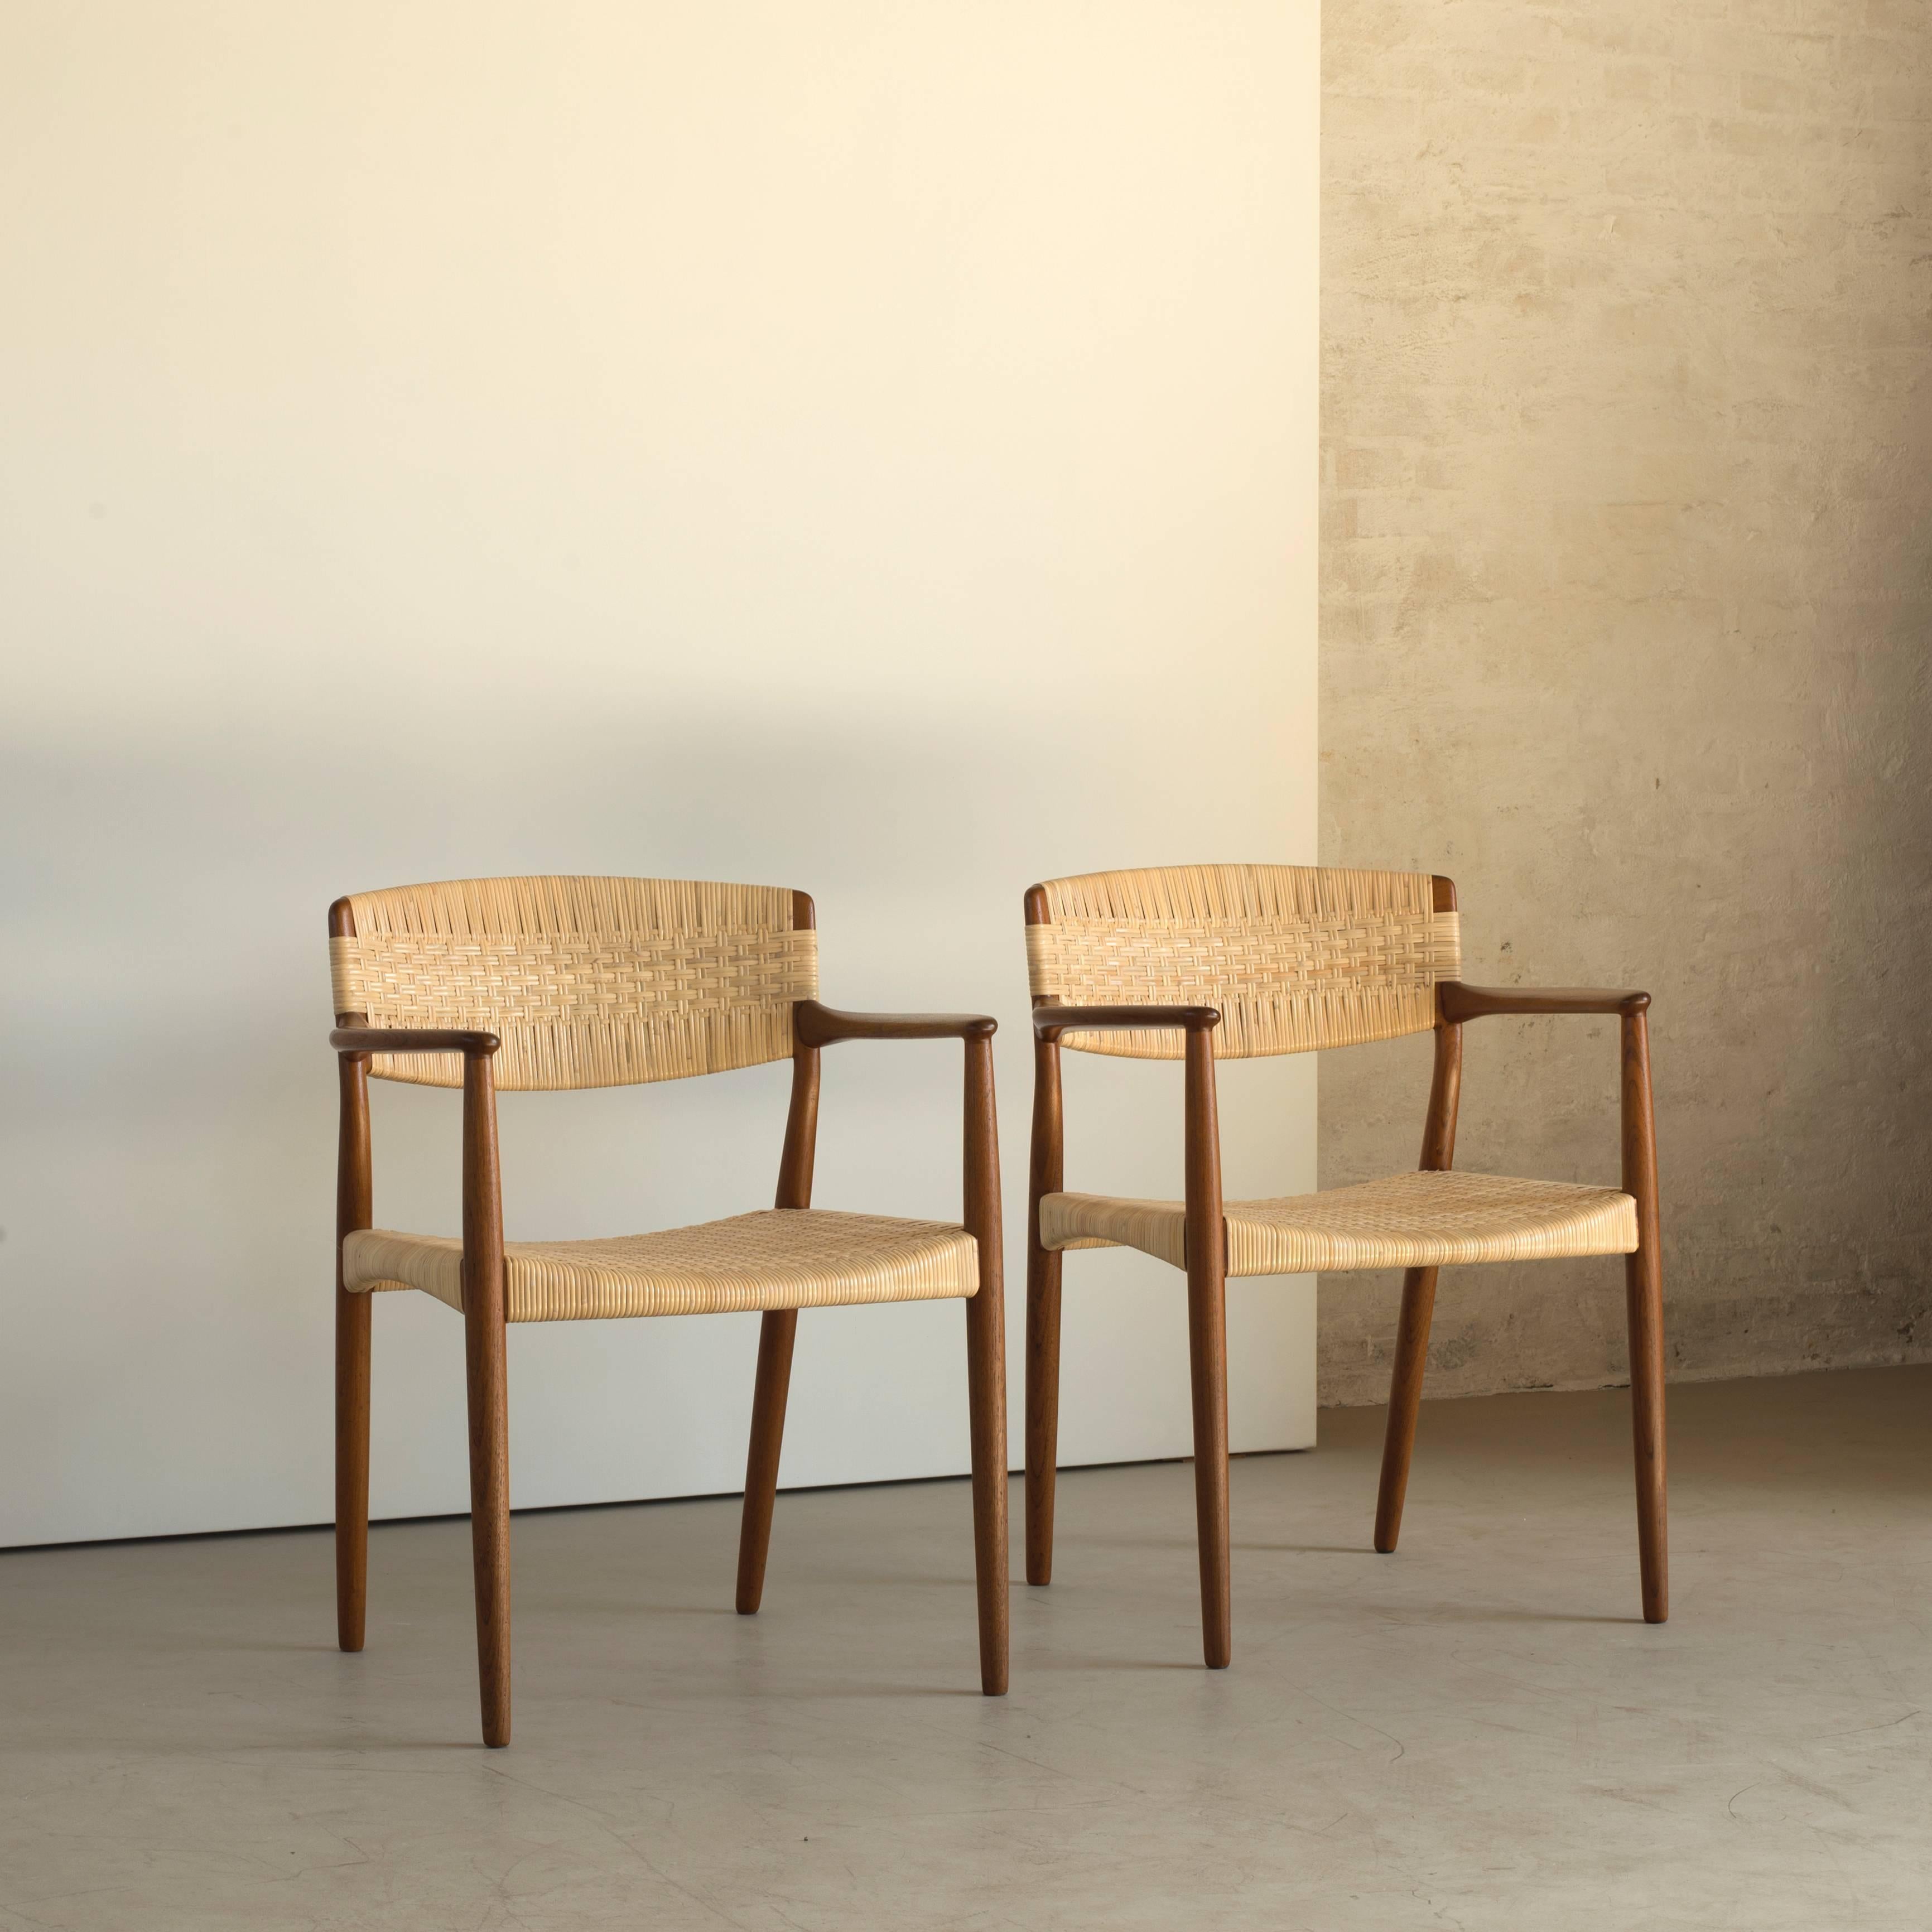 20th Century Pair of Armchairs by Ejner Larsen & Aksel Bender Madsen for Willy Beck